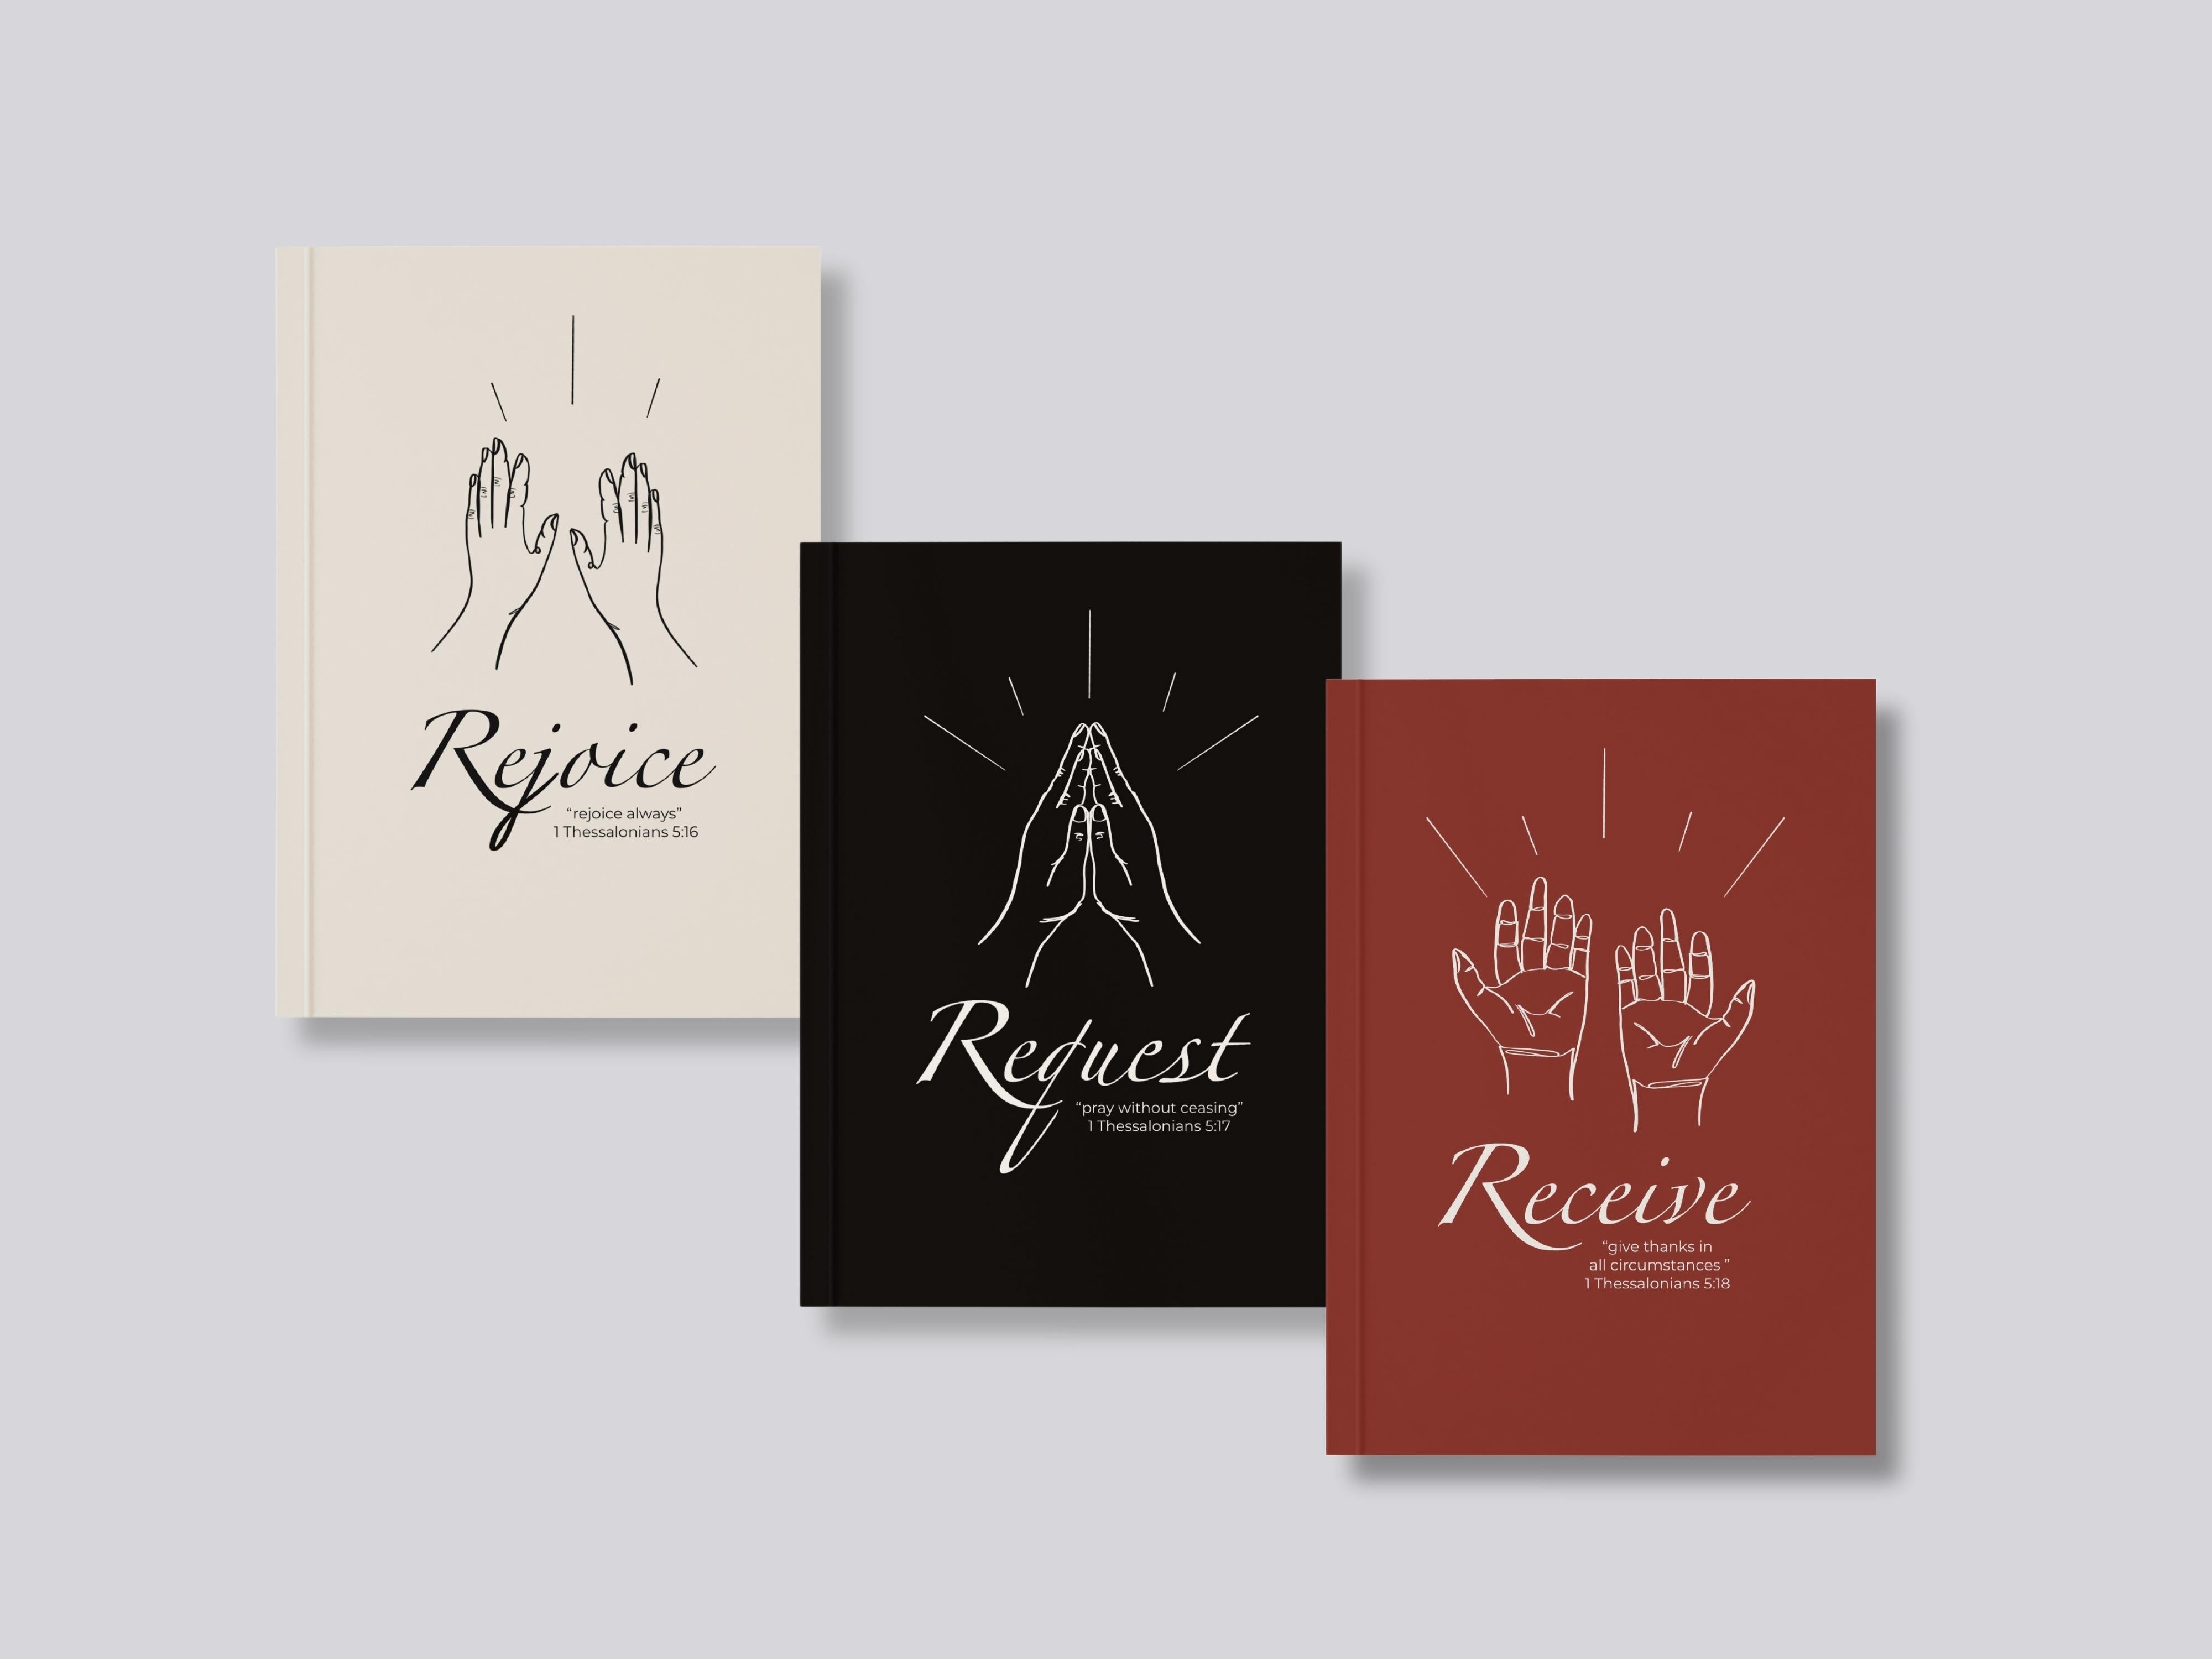 PRE-ORDER Prayer Journals * Limited Time Holiday Pricing (for bundle)*